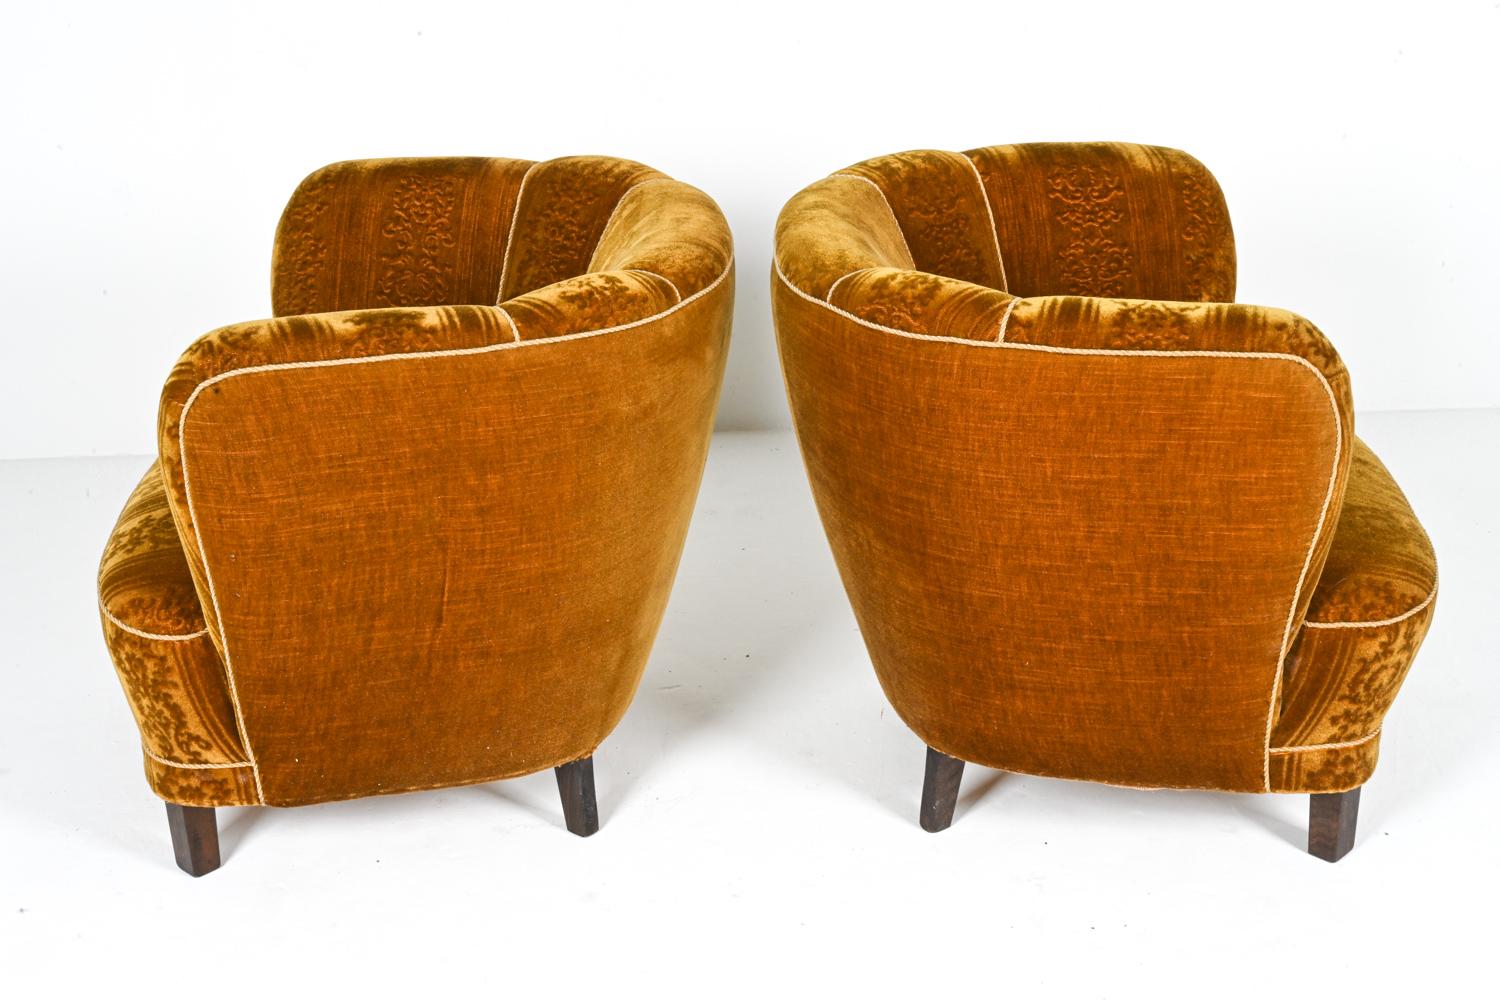 Pair of Manner of Viggo Boesen Lounge Chairs by Slagelse, c. 1940's For Sale 2